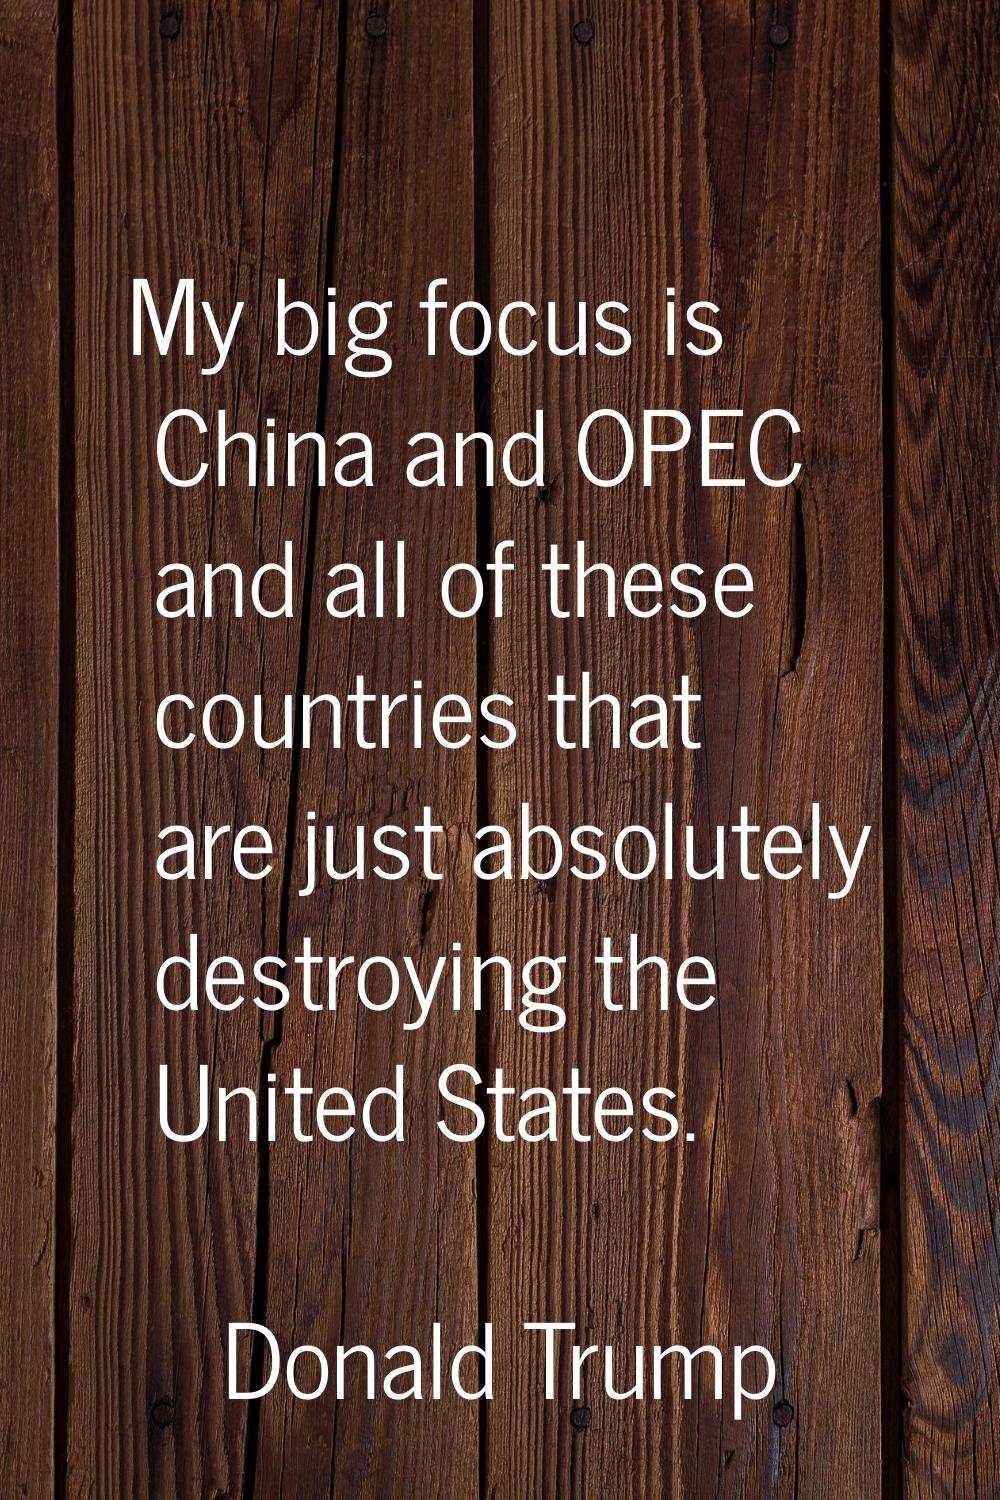 My big focus is China and OPEC and all of these countries that are just absolutely destroying the U